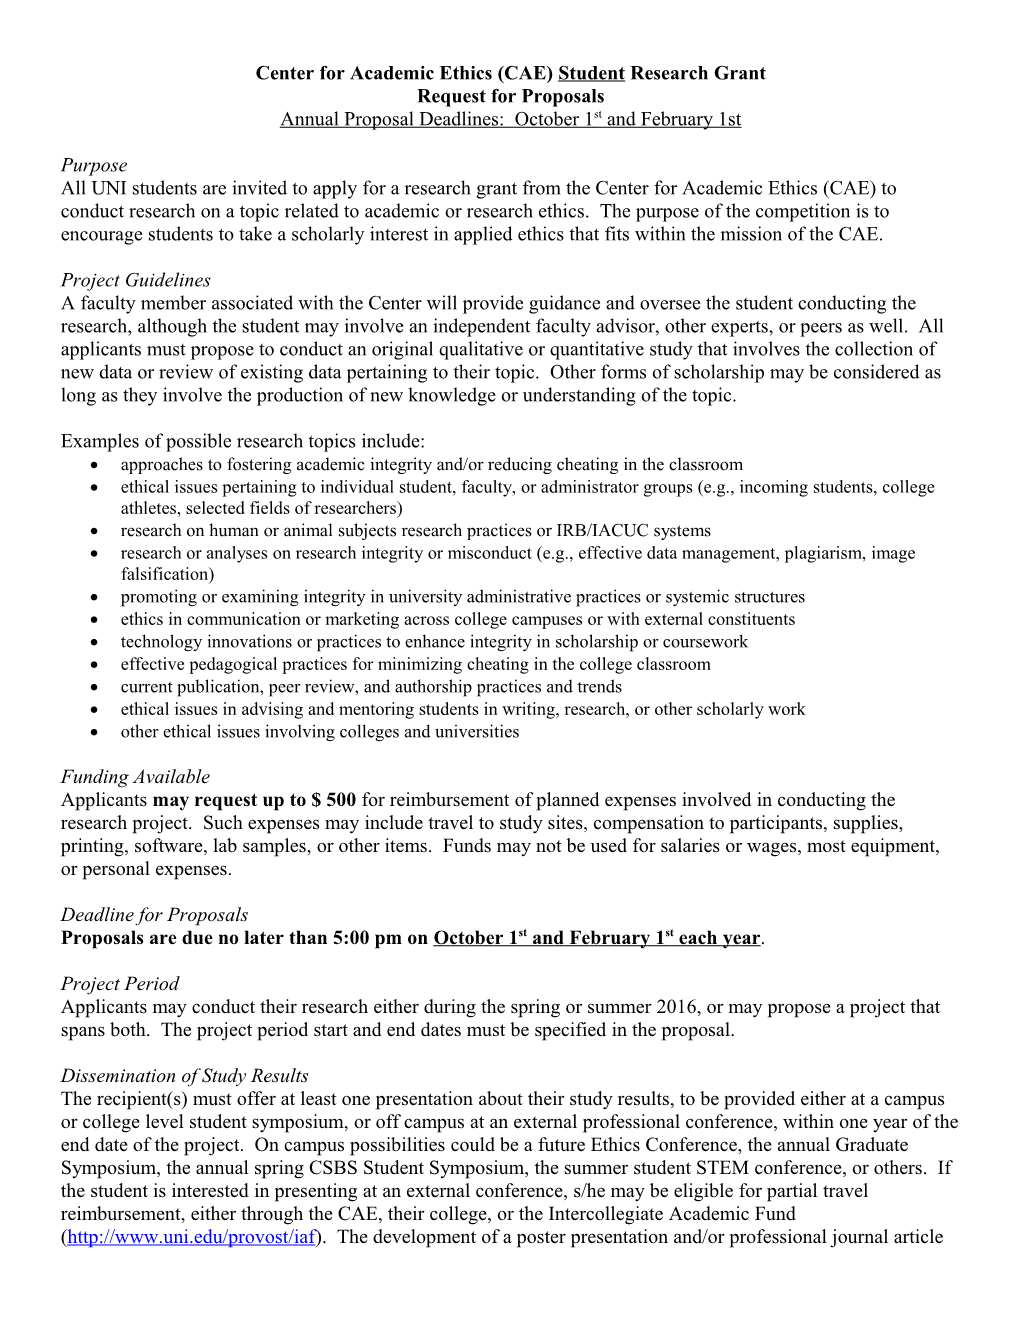 Center for Academic Ethics (CAE) Studentresearch Grant